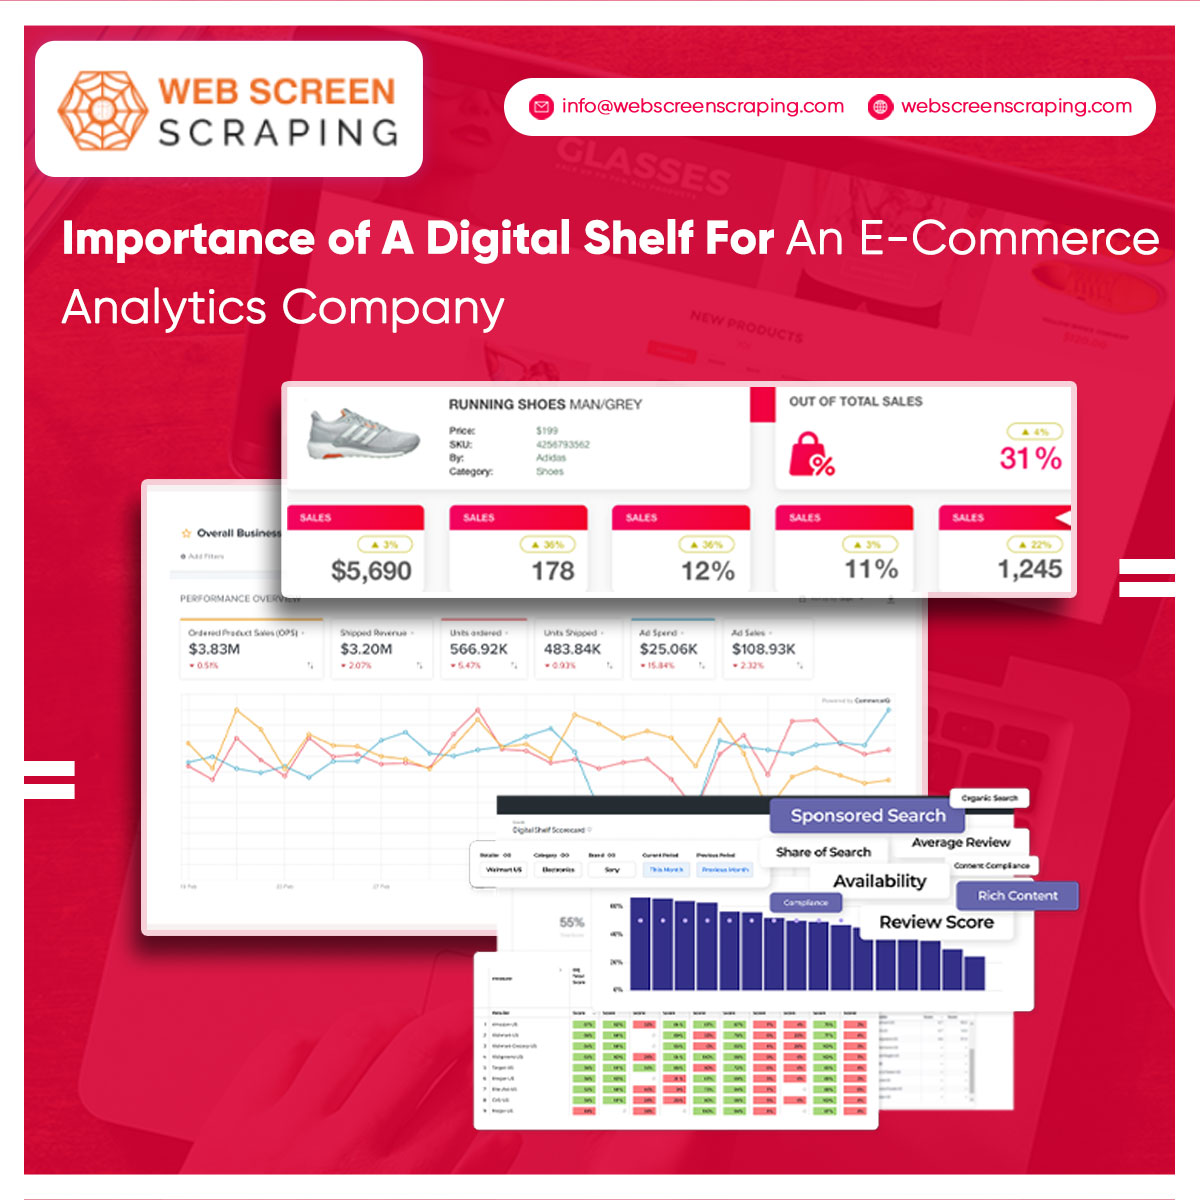 Unlock the power of #Ecommerceanalytics with a #digitalshelf. It provides valuable insights into product performance, pricing & customer behavior, enabling companies to optimize their online presence & drive sales.
webscreenscraping.com/what-is-the-im…

#OptimizePerformance #webscreenscraping